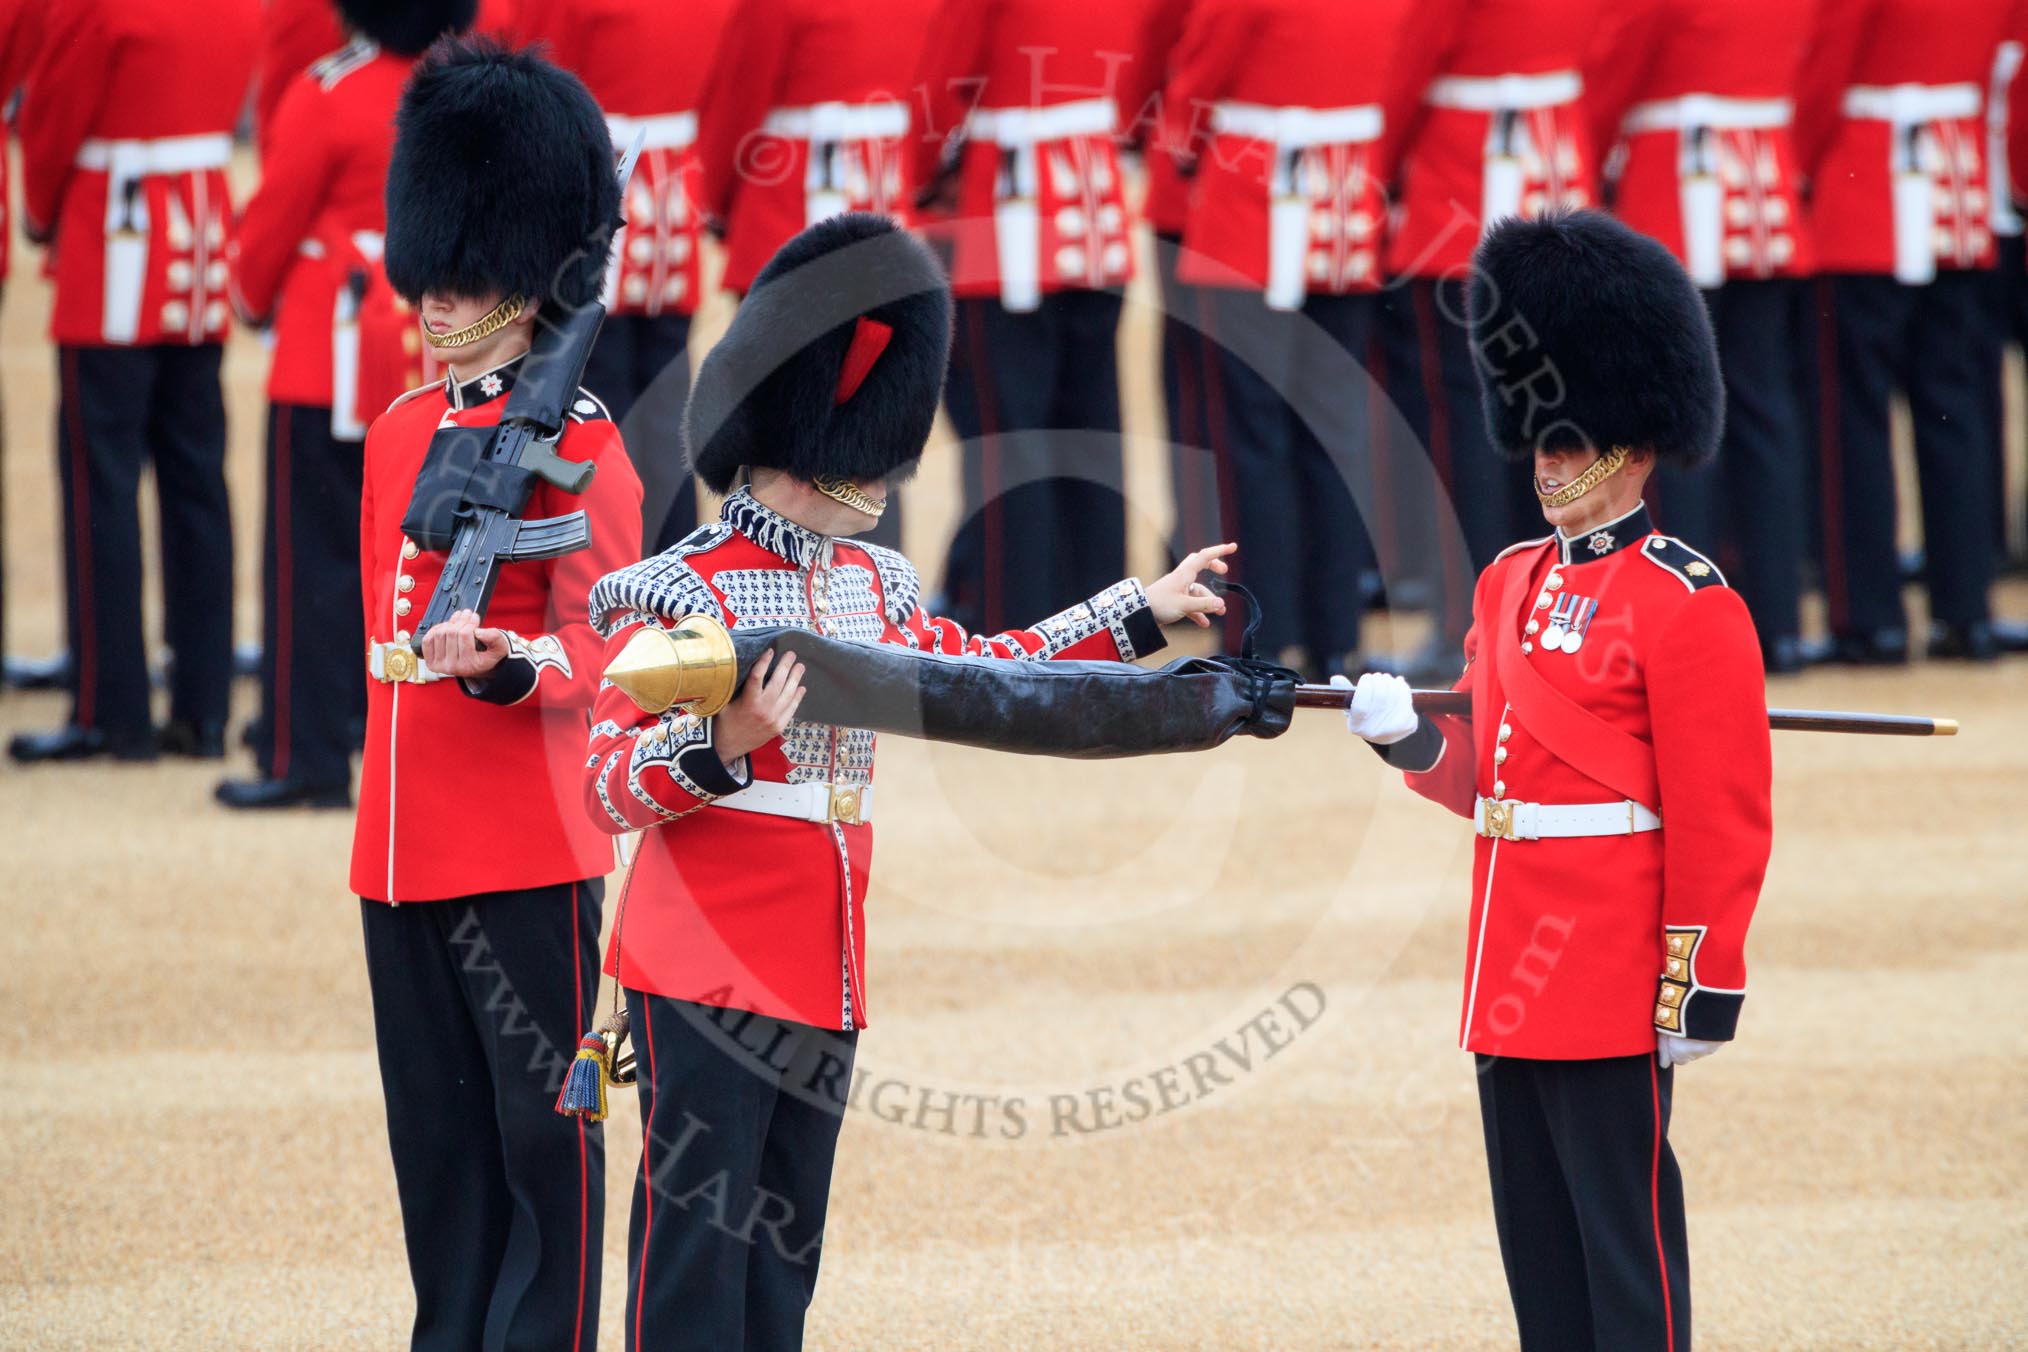 Duty Drummer  Sam Orchard uncasing the Colour held by Colour Sergeant Sam McAuley (31), with Colour Sentry Guardsman Jonathon Hughes (26) behind, during The Colonel's Review 2018 (final rehearsal for Trooping the Colour, The Queen's Birthday Parade)  at Horse Guards Parade, Westminster, London, 2 June 2018, 10:33.